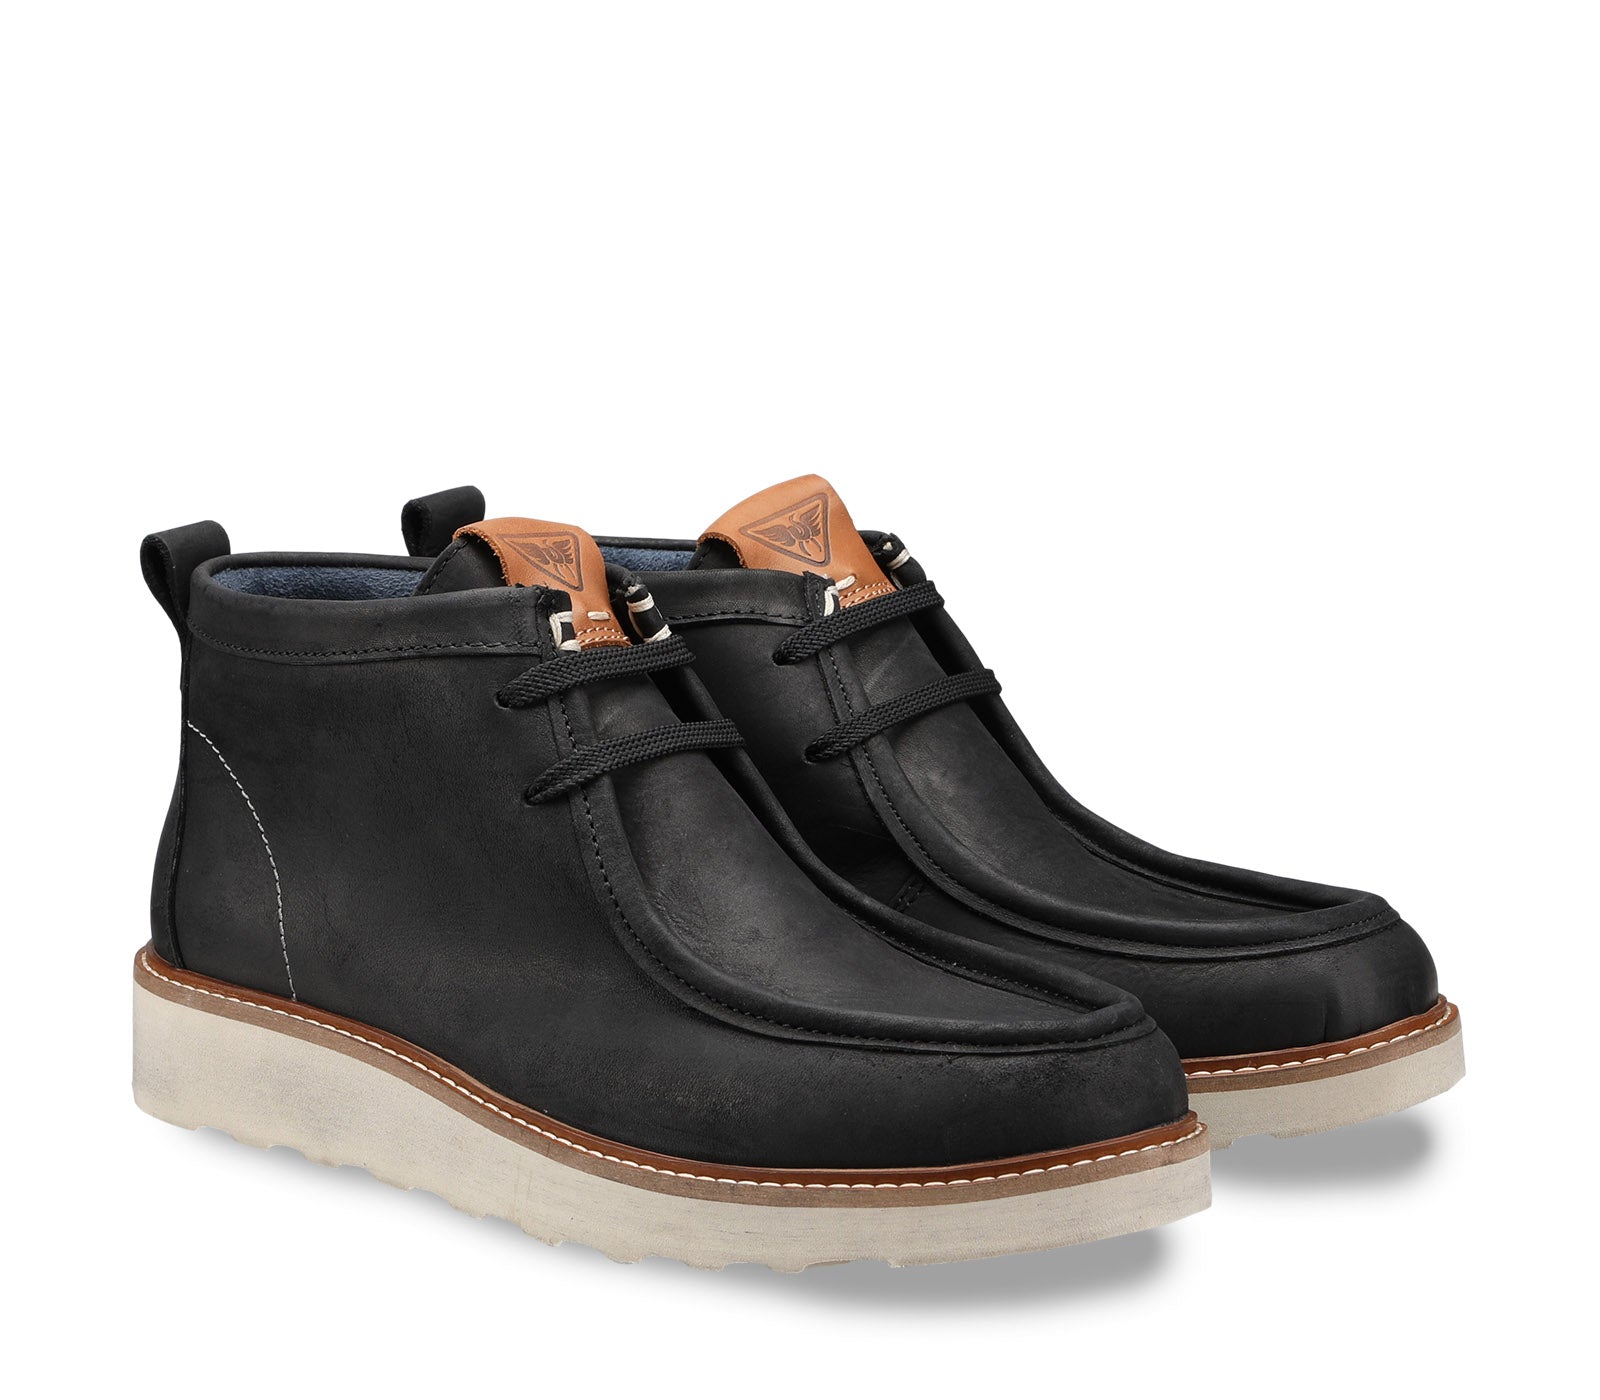 Men's black leather lace-up boot